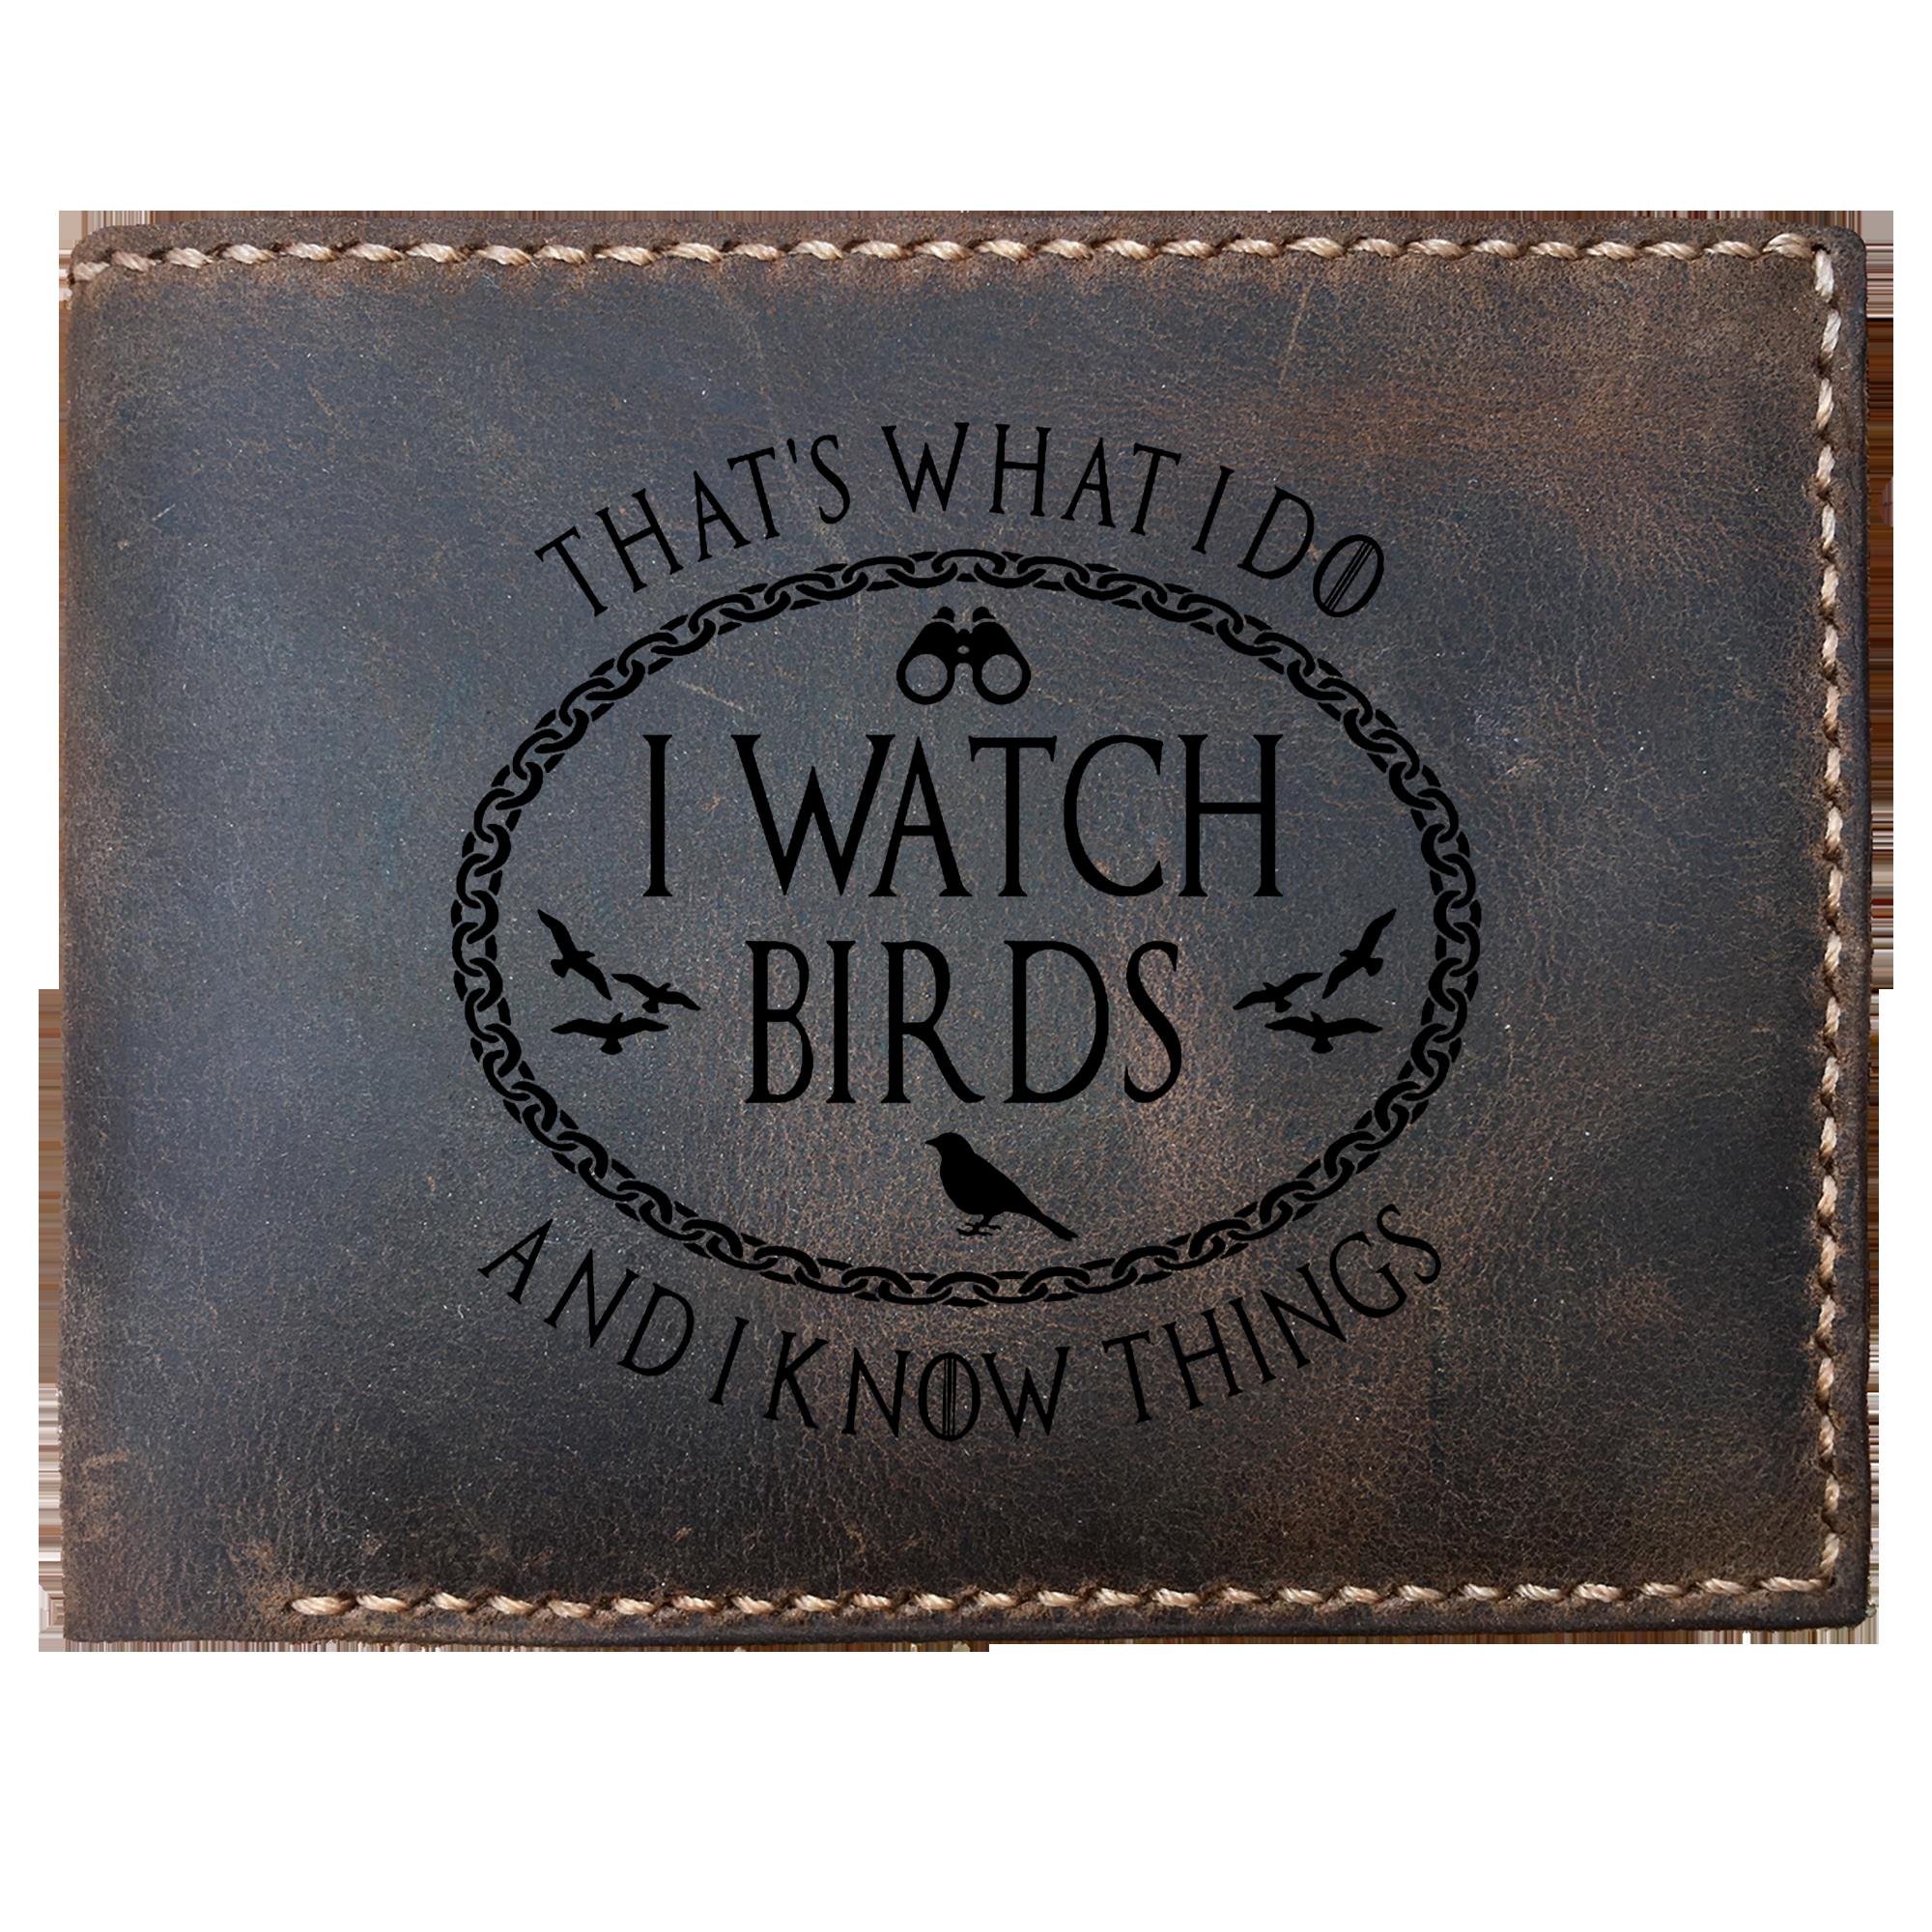 Skitongifts Funny Custom Laser Engraved Bifold Leather Wallet For Men, I Watch Birds And I Know Things Parody Birdwatching